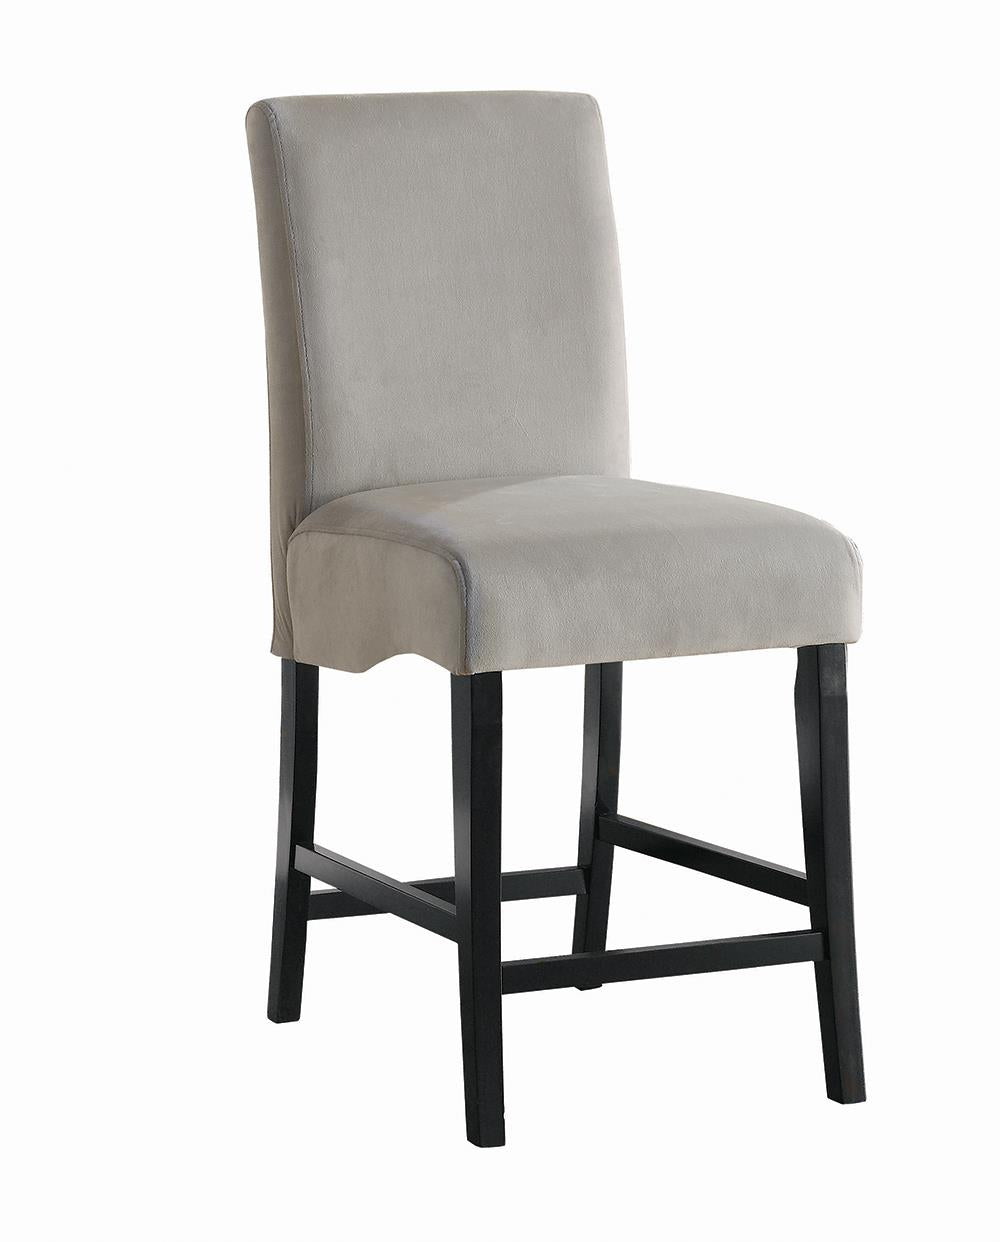 Stanton Upholstered Counter Height Chairs Grey and Black (Set of 2)  Las Vegas Furniture Stores